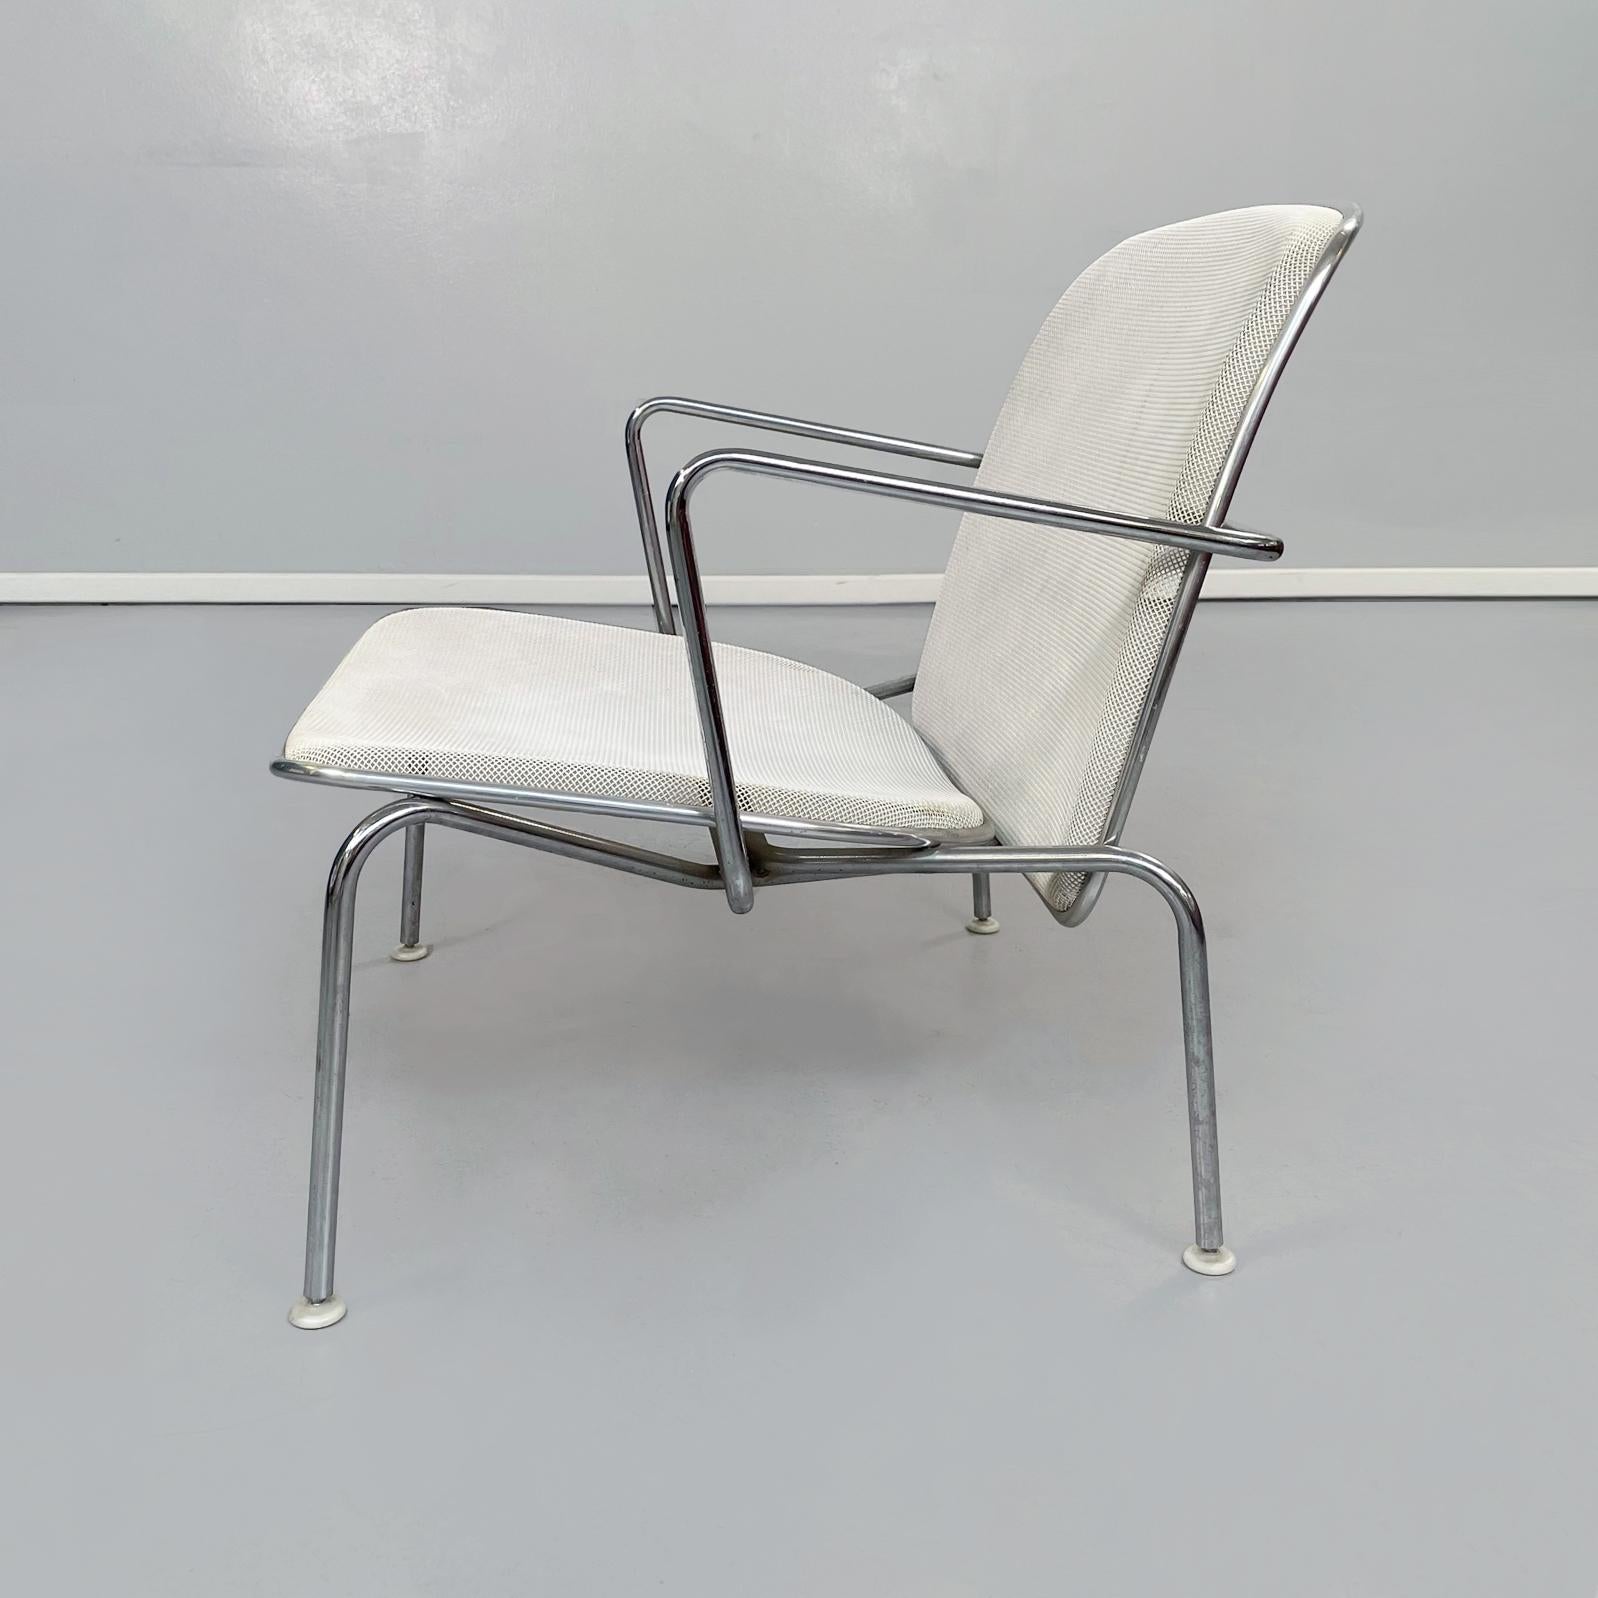 Italian 21st Century White Metal Steel Web Armchairs by Citterio for B&B, 2000s In Good Condition For Sale In MIlano, IT